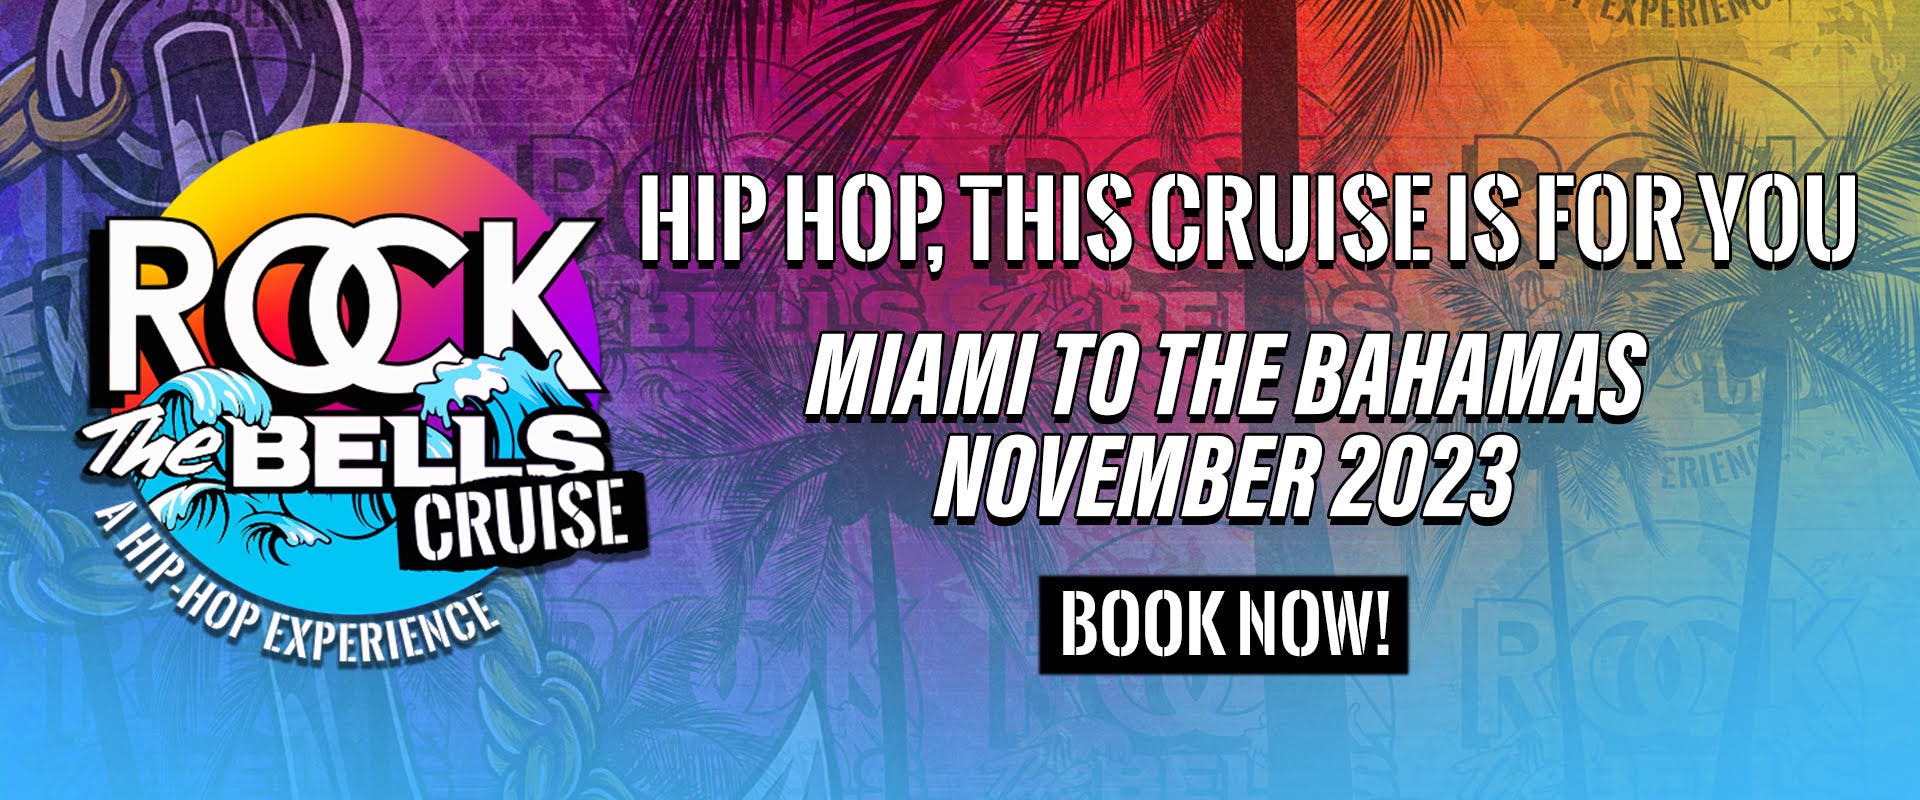 Rock The Bells Announces The “Rock The Bells Cruise A HipHop Experience”